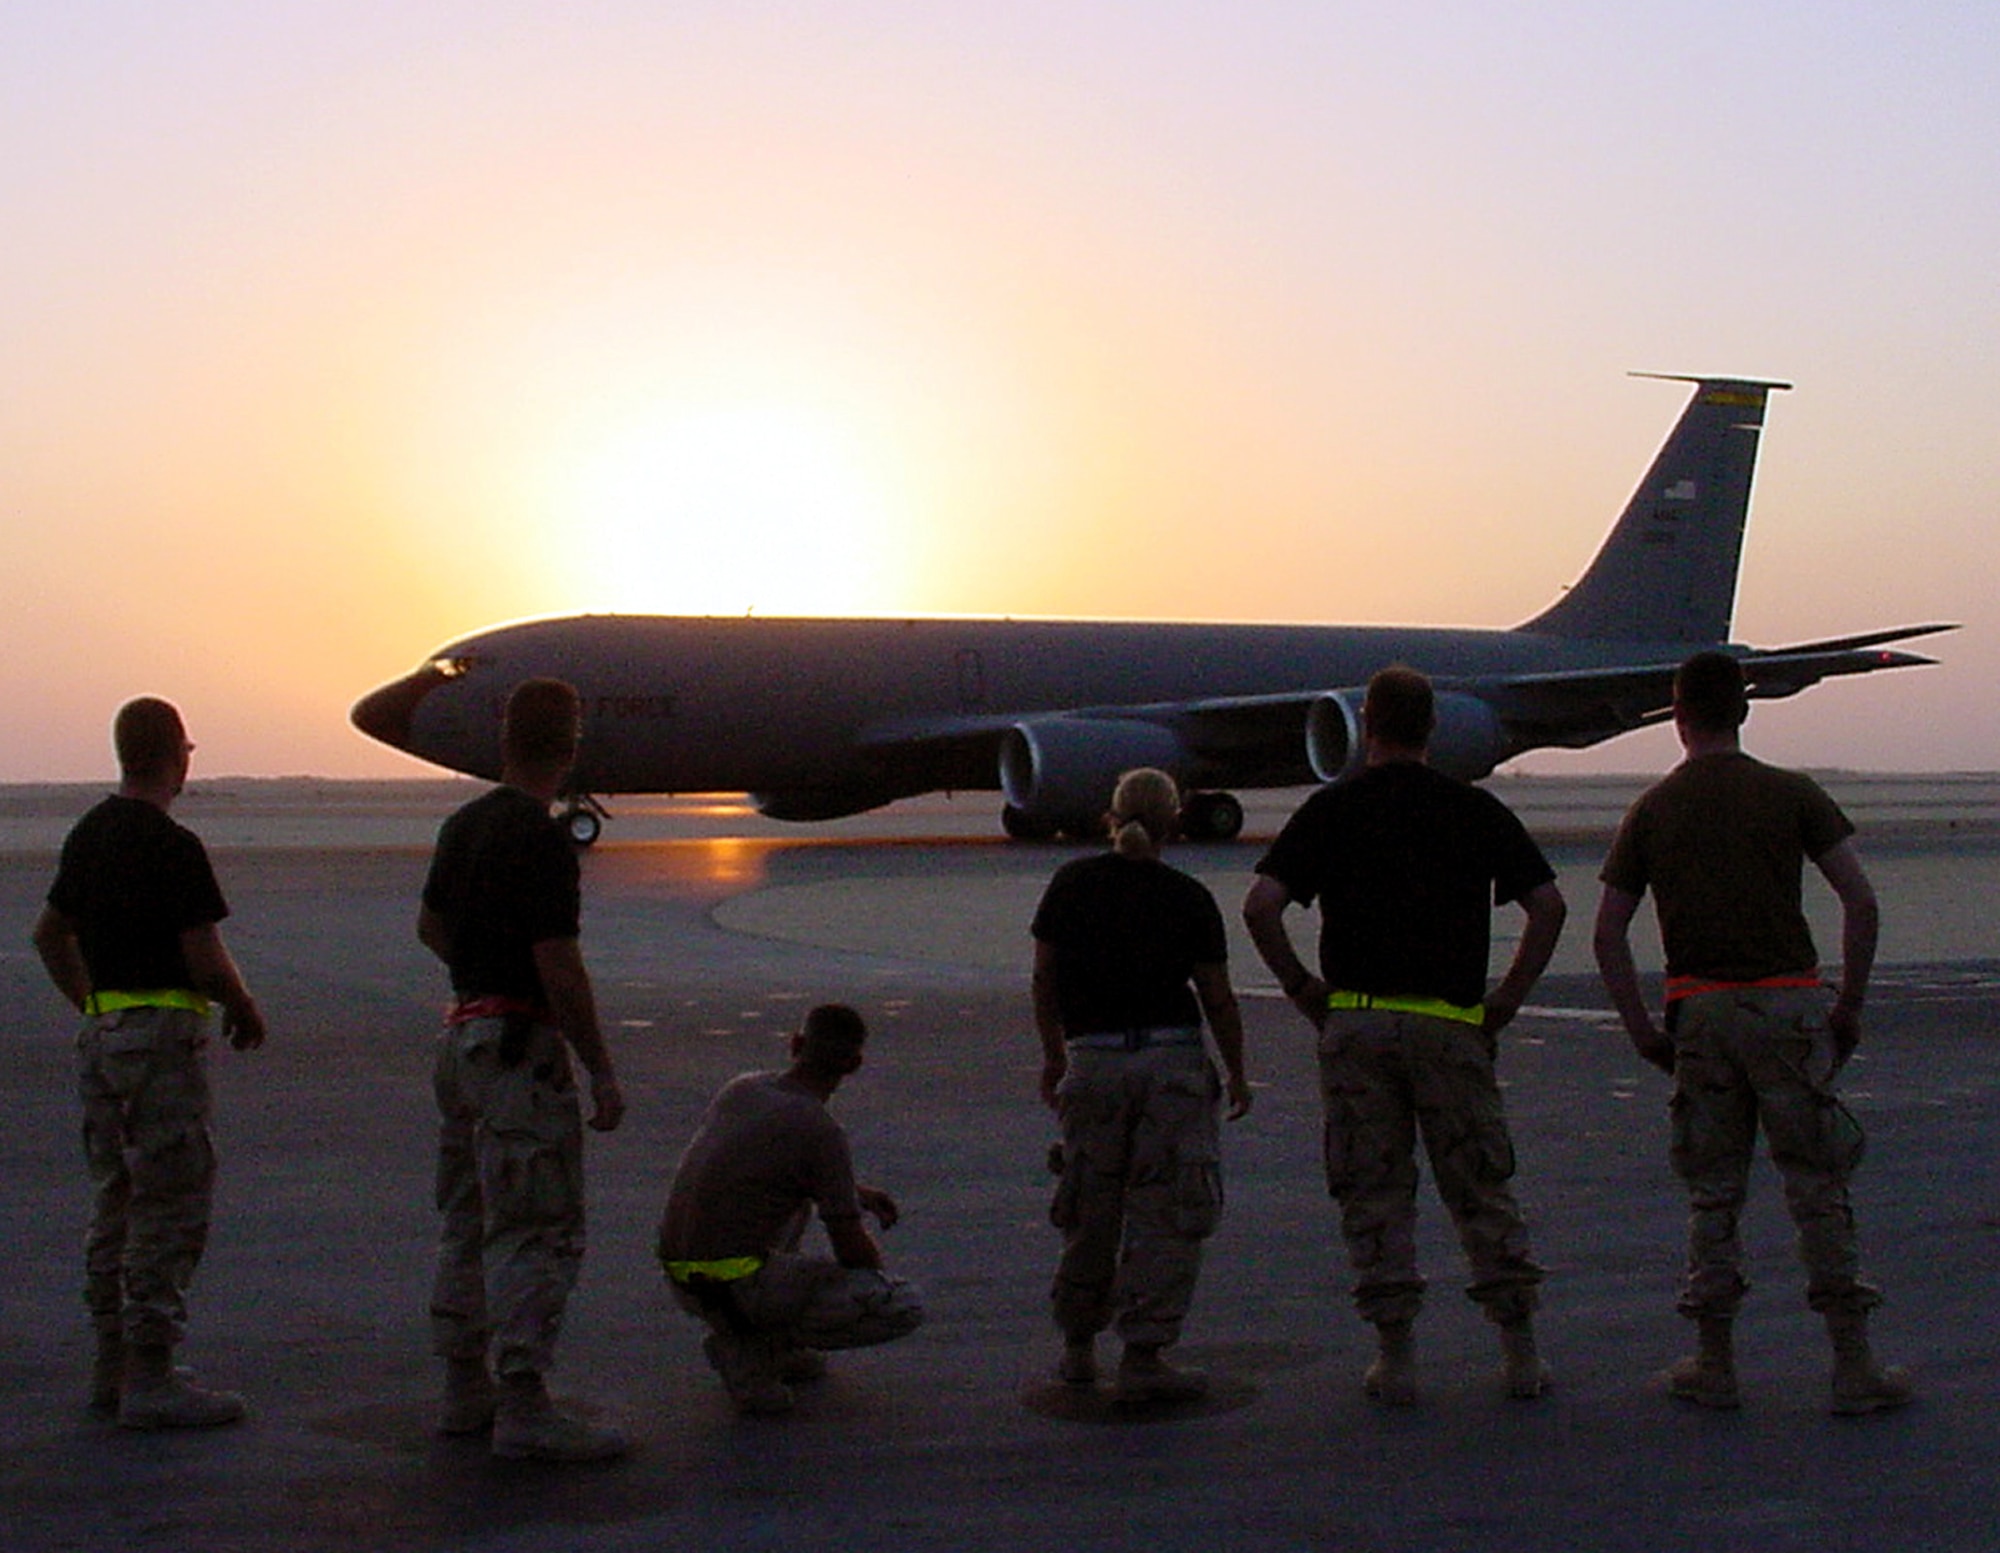 SOUTHWEST ASIA -- Tanker maintenance troops from the 319th Air Refueling Wing at Grand Forks Air Force Base, N.D., watch as a tanker from the 22nd ARW at McConnelll AFB, Kan., rolls off into the sunset for a night air-refueling mission.  Tanker units from Grand Forks; McConnell; MacDill AFB, Fla; Robins AFB, Ga.; and Fairchild AFB, Wash., combined here for a short time to work together in the 340th Expeditionary Air Refueling Squadron.  (U.S. Air Force photo by Staff Sgt. Scott T. Sturkol)